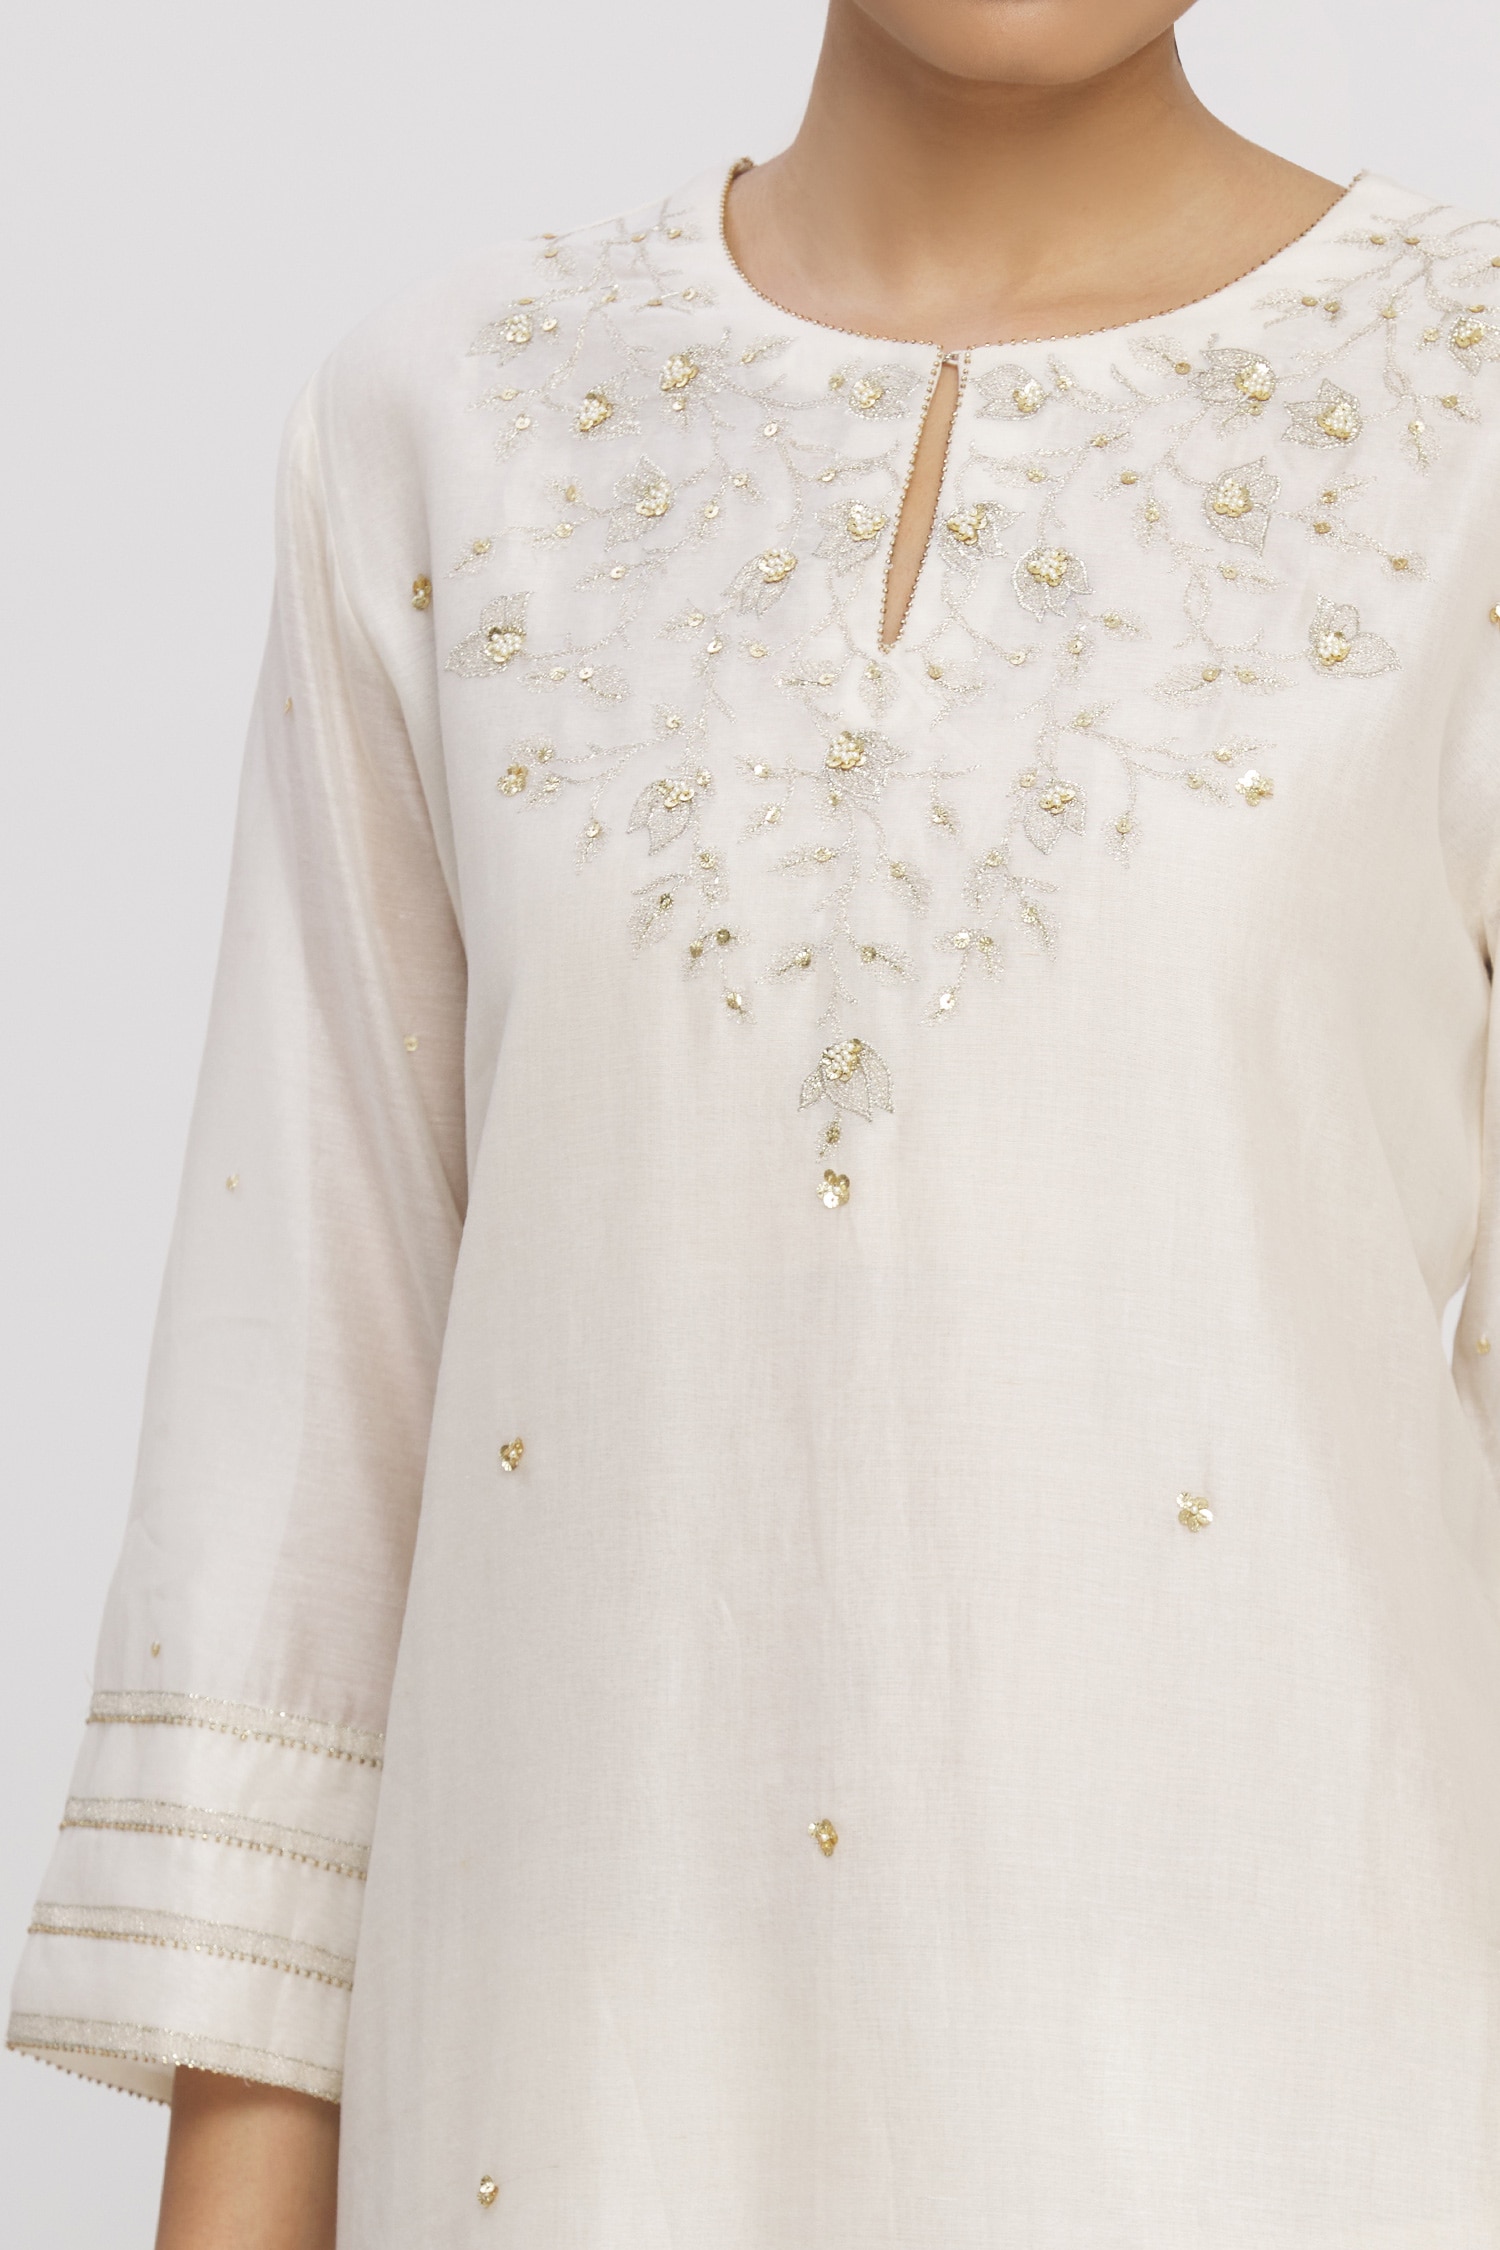 Buy One Not Two White Embroidered Tunic Online | Aza Fashions